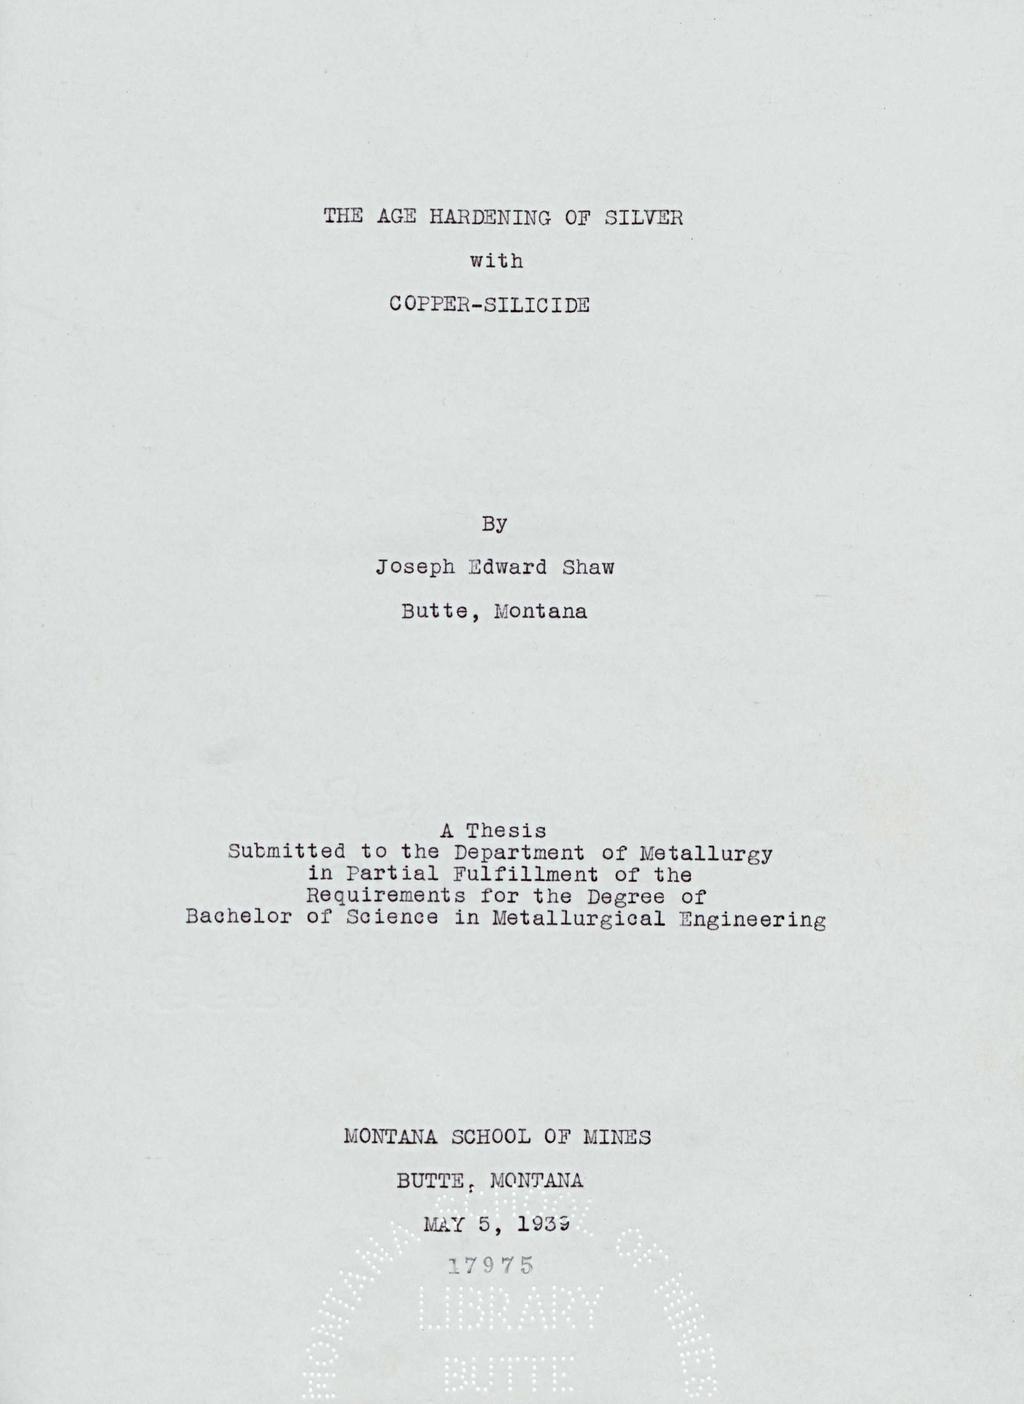 THE AGE HARDENING OF SILVER with COPPER-SILICIDE By Jseph EdWard Shaw Butte, Mnt ana A Thesis Submitted t the Department f Metallurgy in Partial